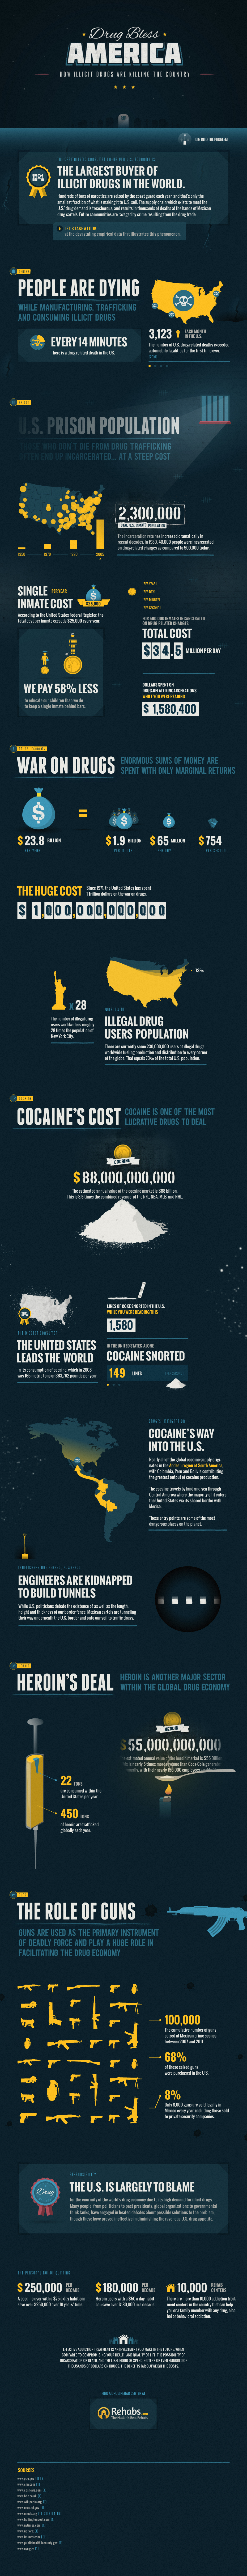 The Drug War's Impact on the American Economy